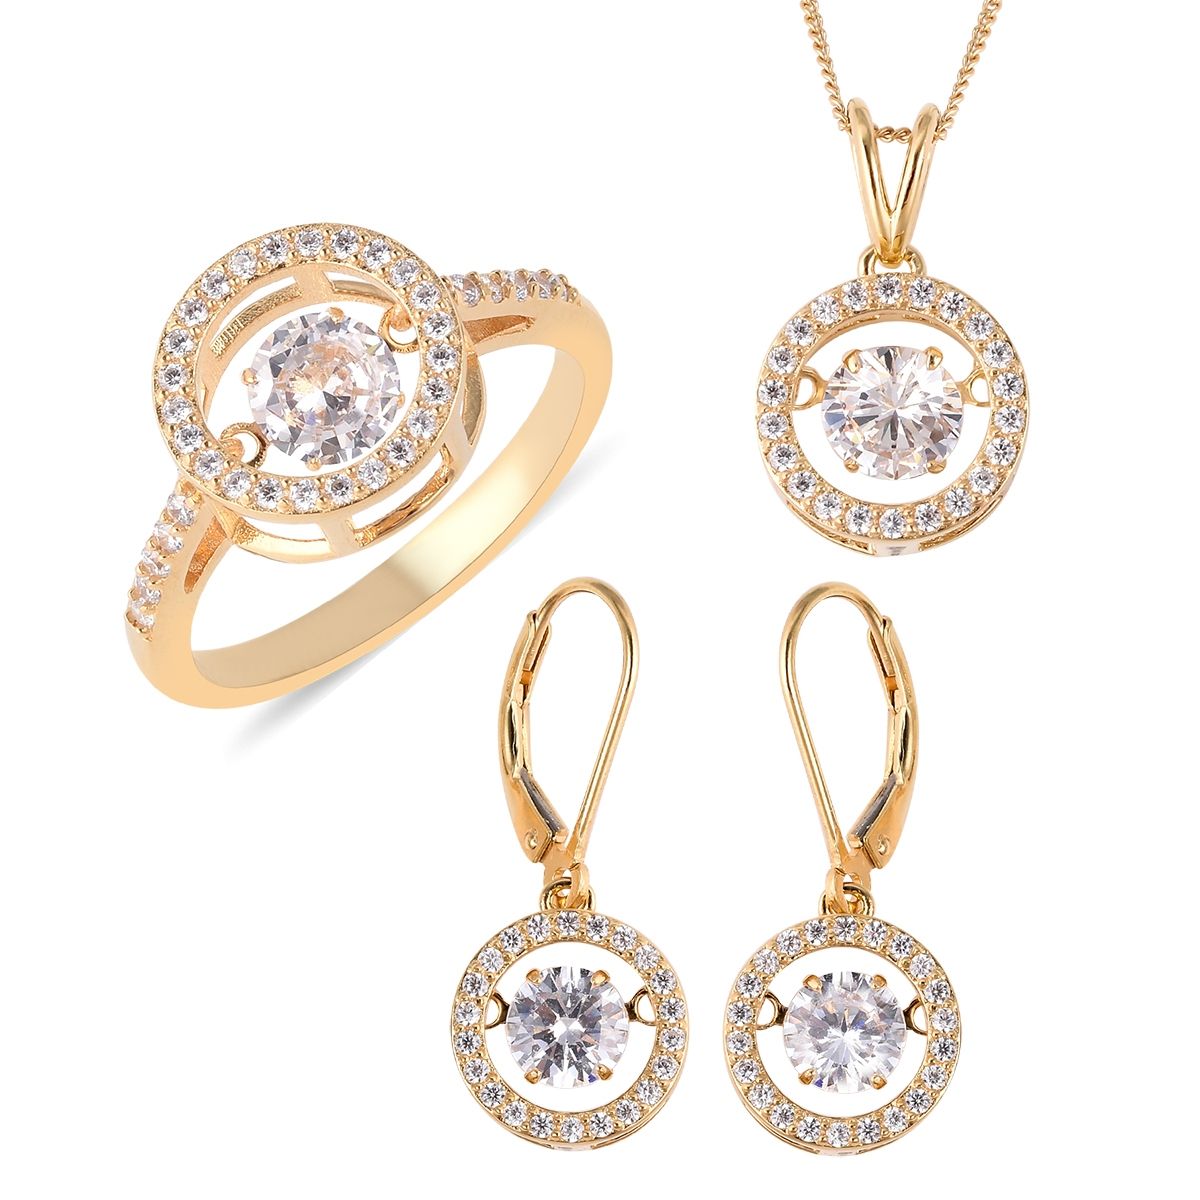 Lustro Stella Dancing Cz Halo Set Earrings, Ring (size 8) And Pendant  Necklace (18 In) In Vermeil Yg Over Sterling Silver (avg. 11.25 G)  (View 18 of 25)